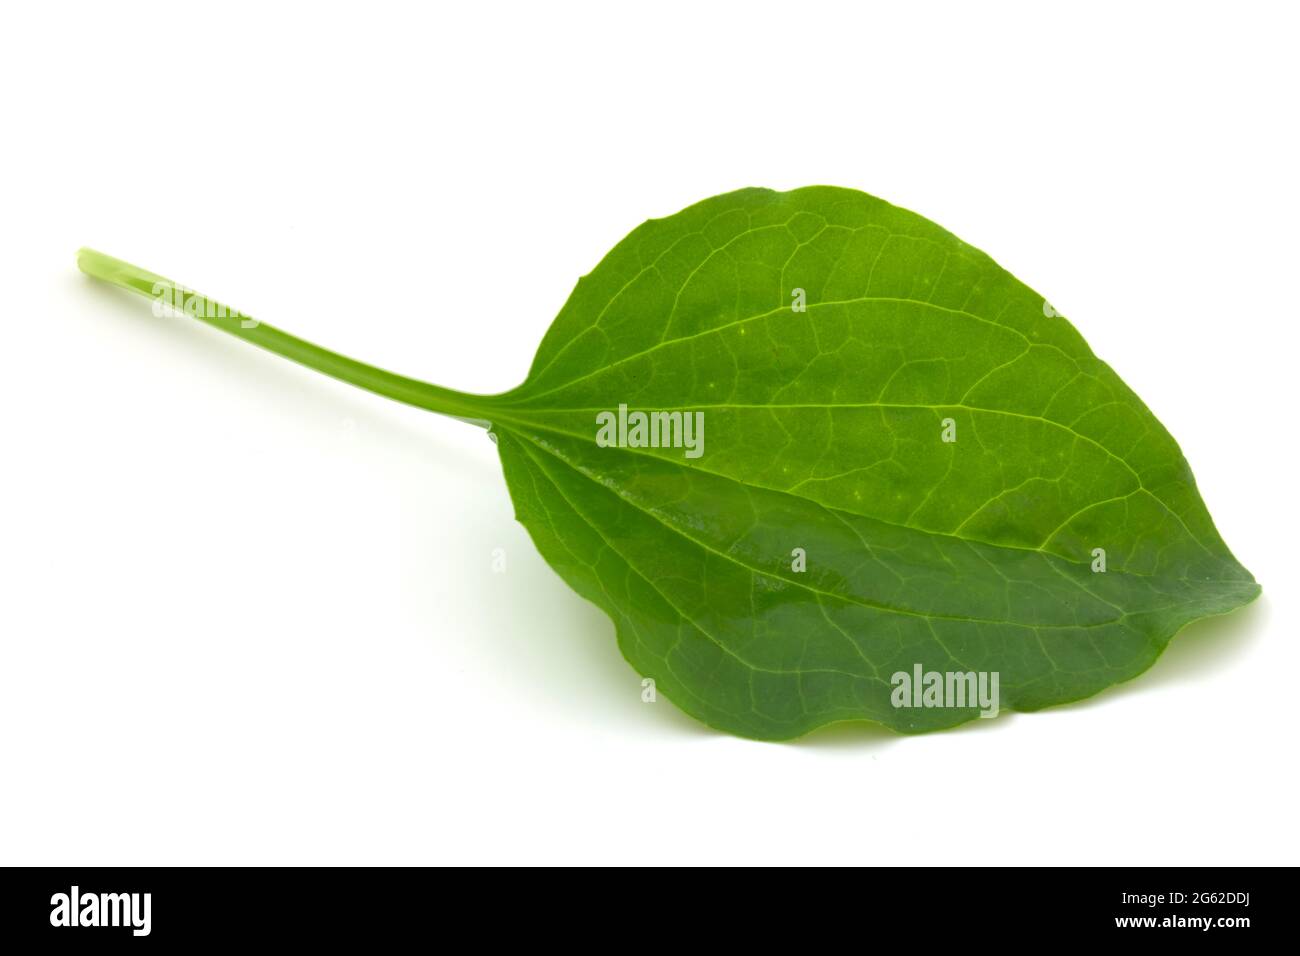 Plantain leaf, medicinal plant isolated on white background. Stock Photo